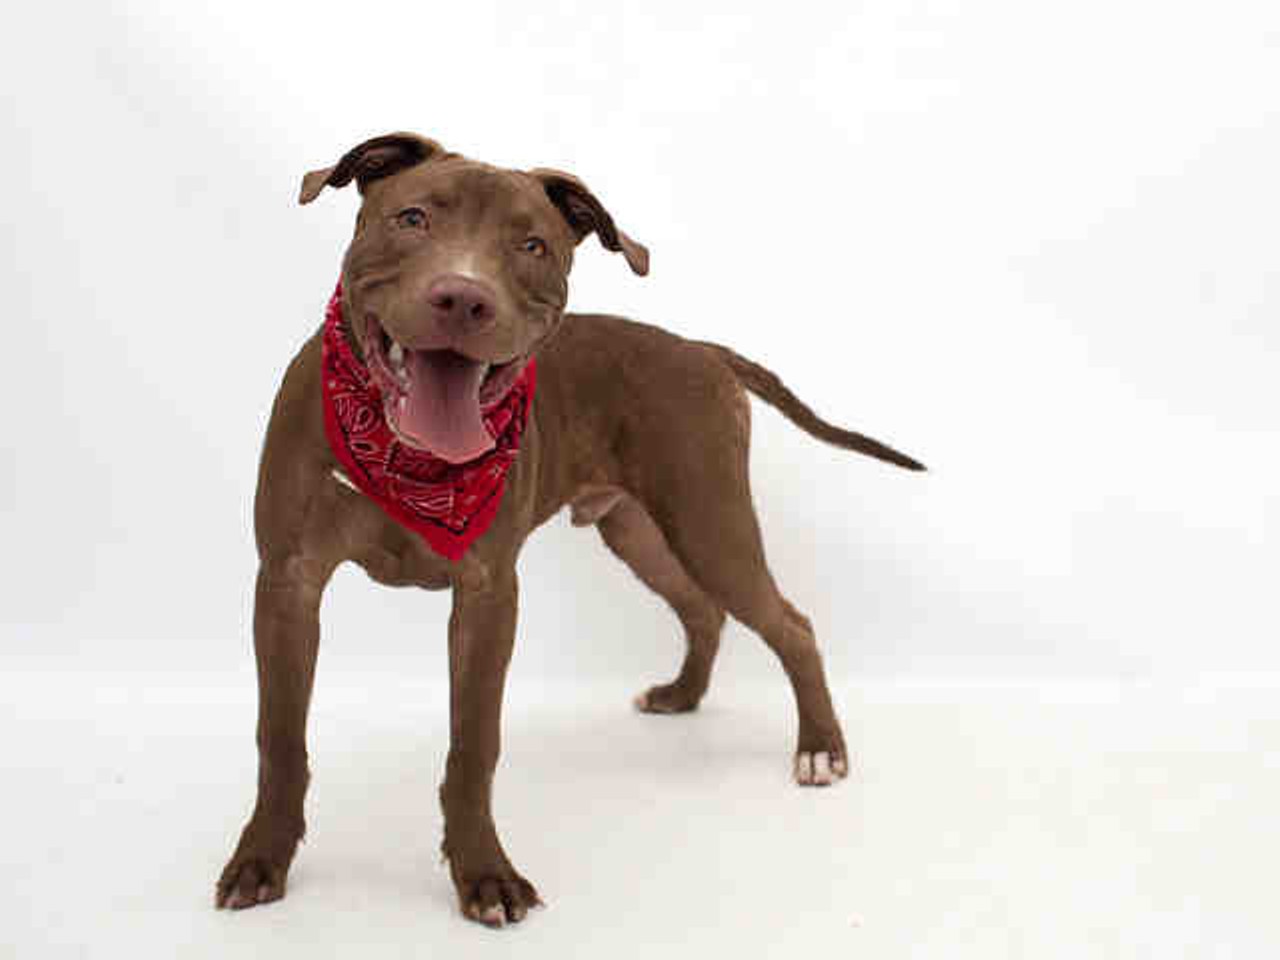 Luther, shelter ID A267026